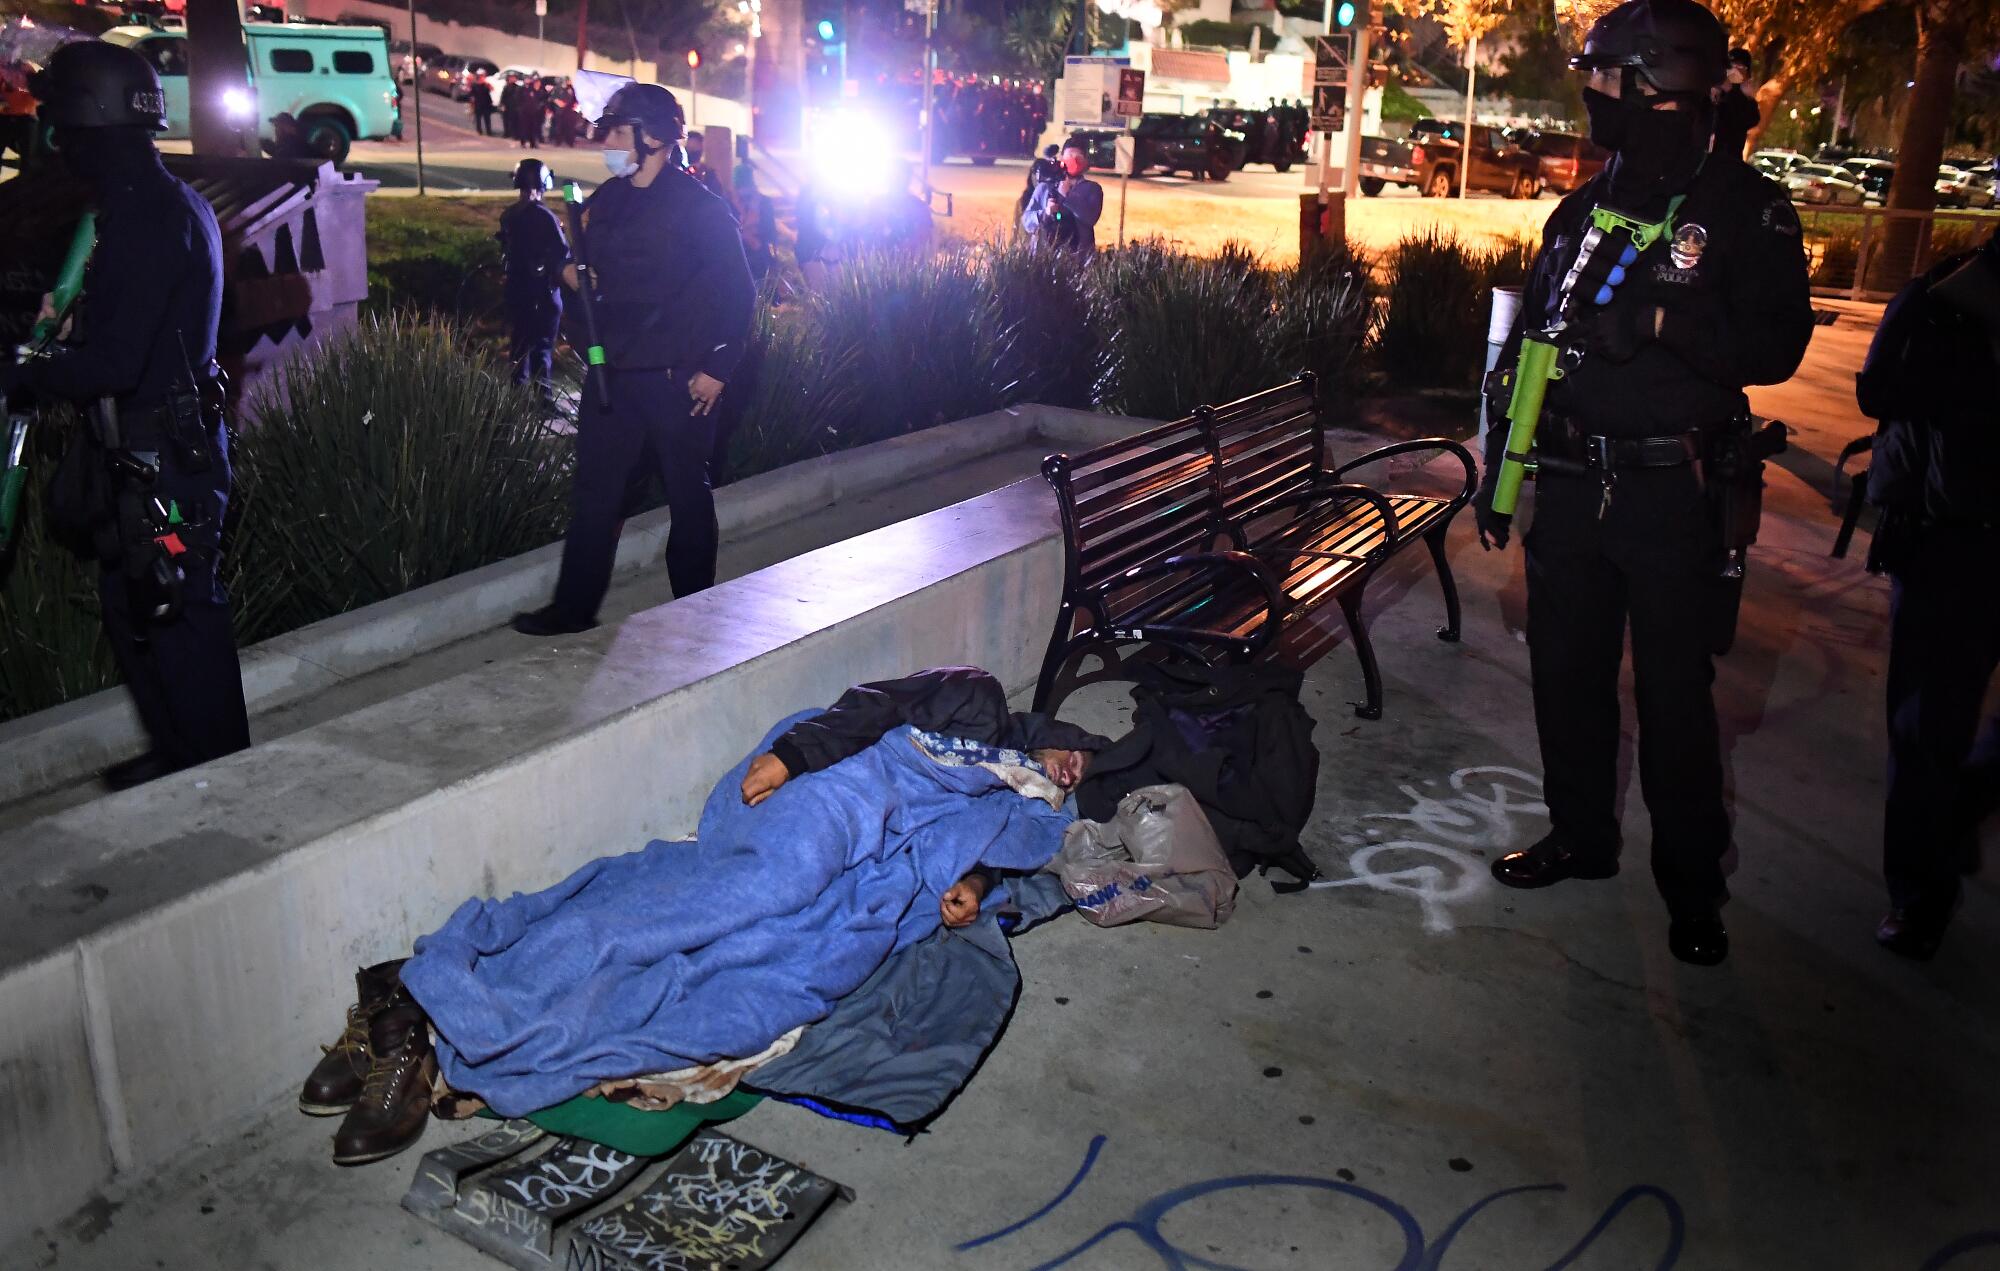 A person sleeps on the ground as police walk by.